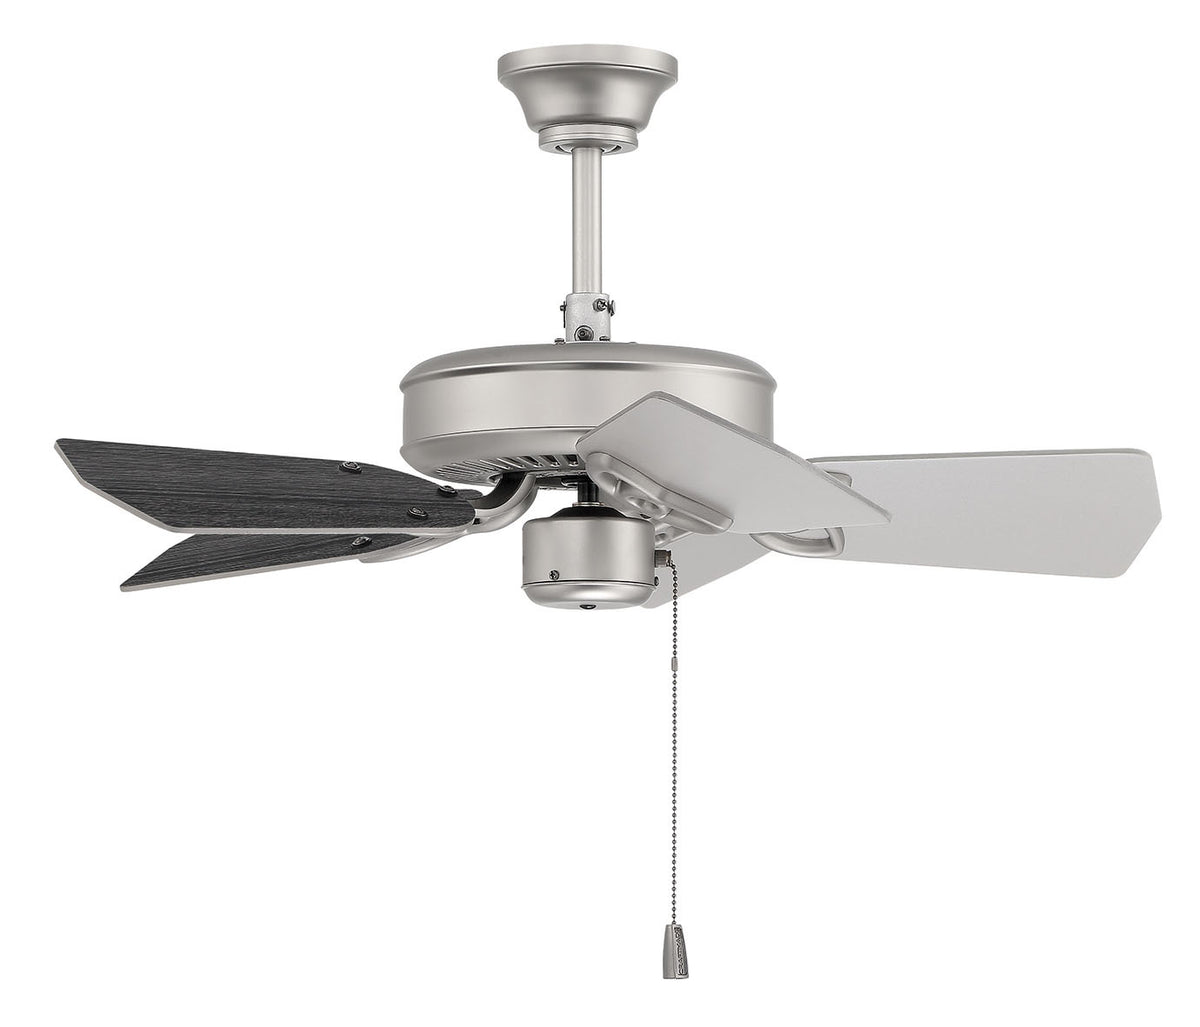 Craftmade - PI30BN5 - 30"Ceiling Fan - Piccolo - Brushed Nickel